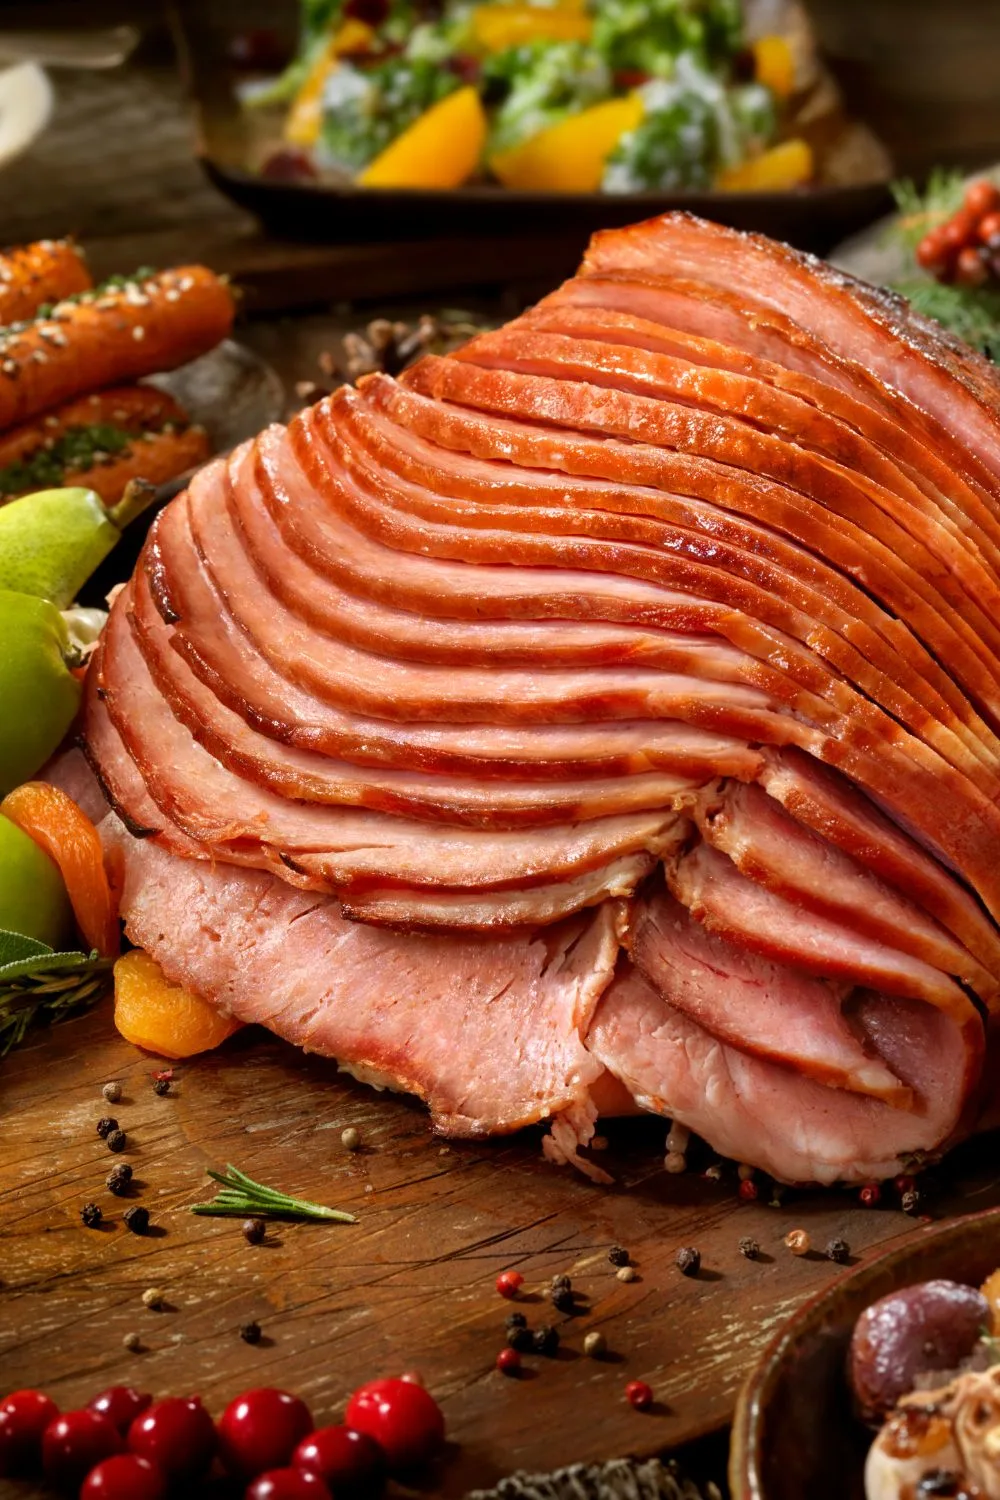 a baked ham sliced up with vegetables in the background